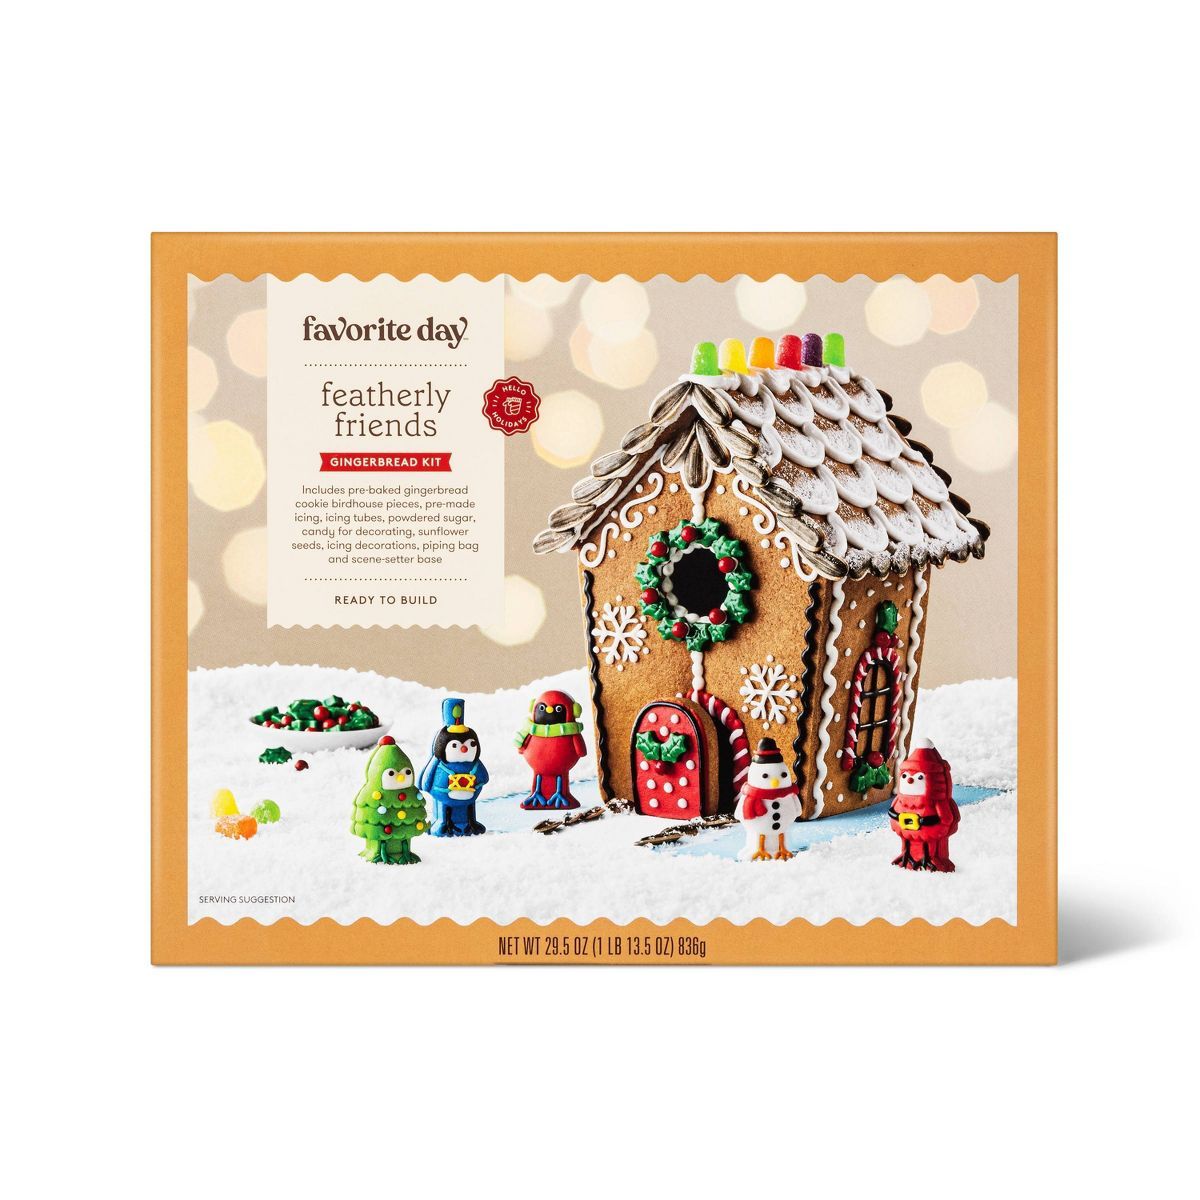 Holiday Featherly Friends Gingerbread House Kit - 27.36oz - Favorite Day™ | Target